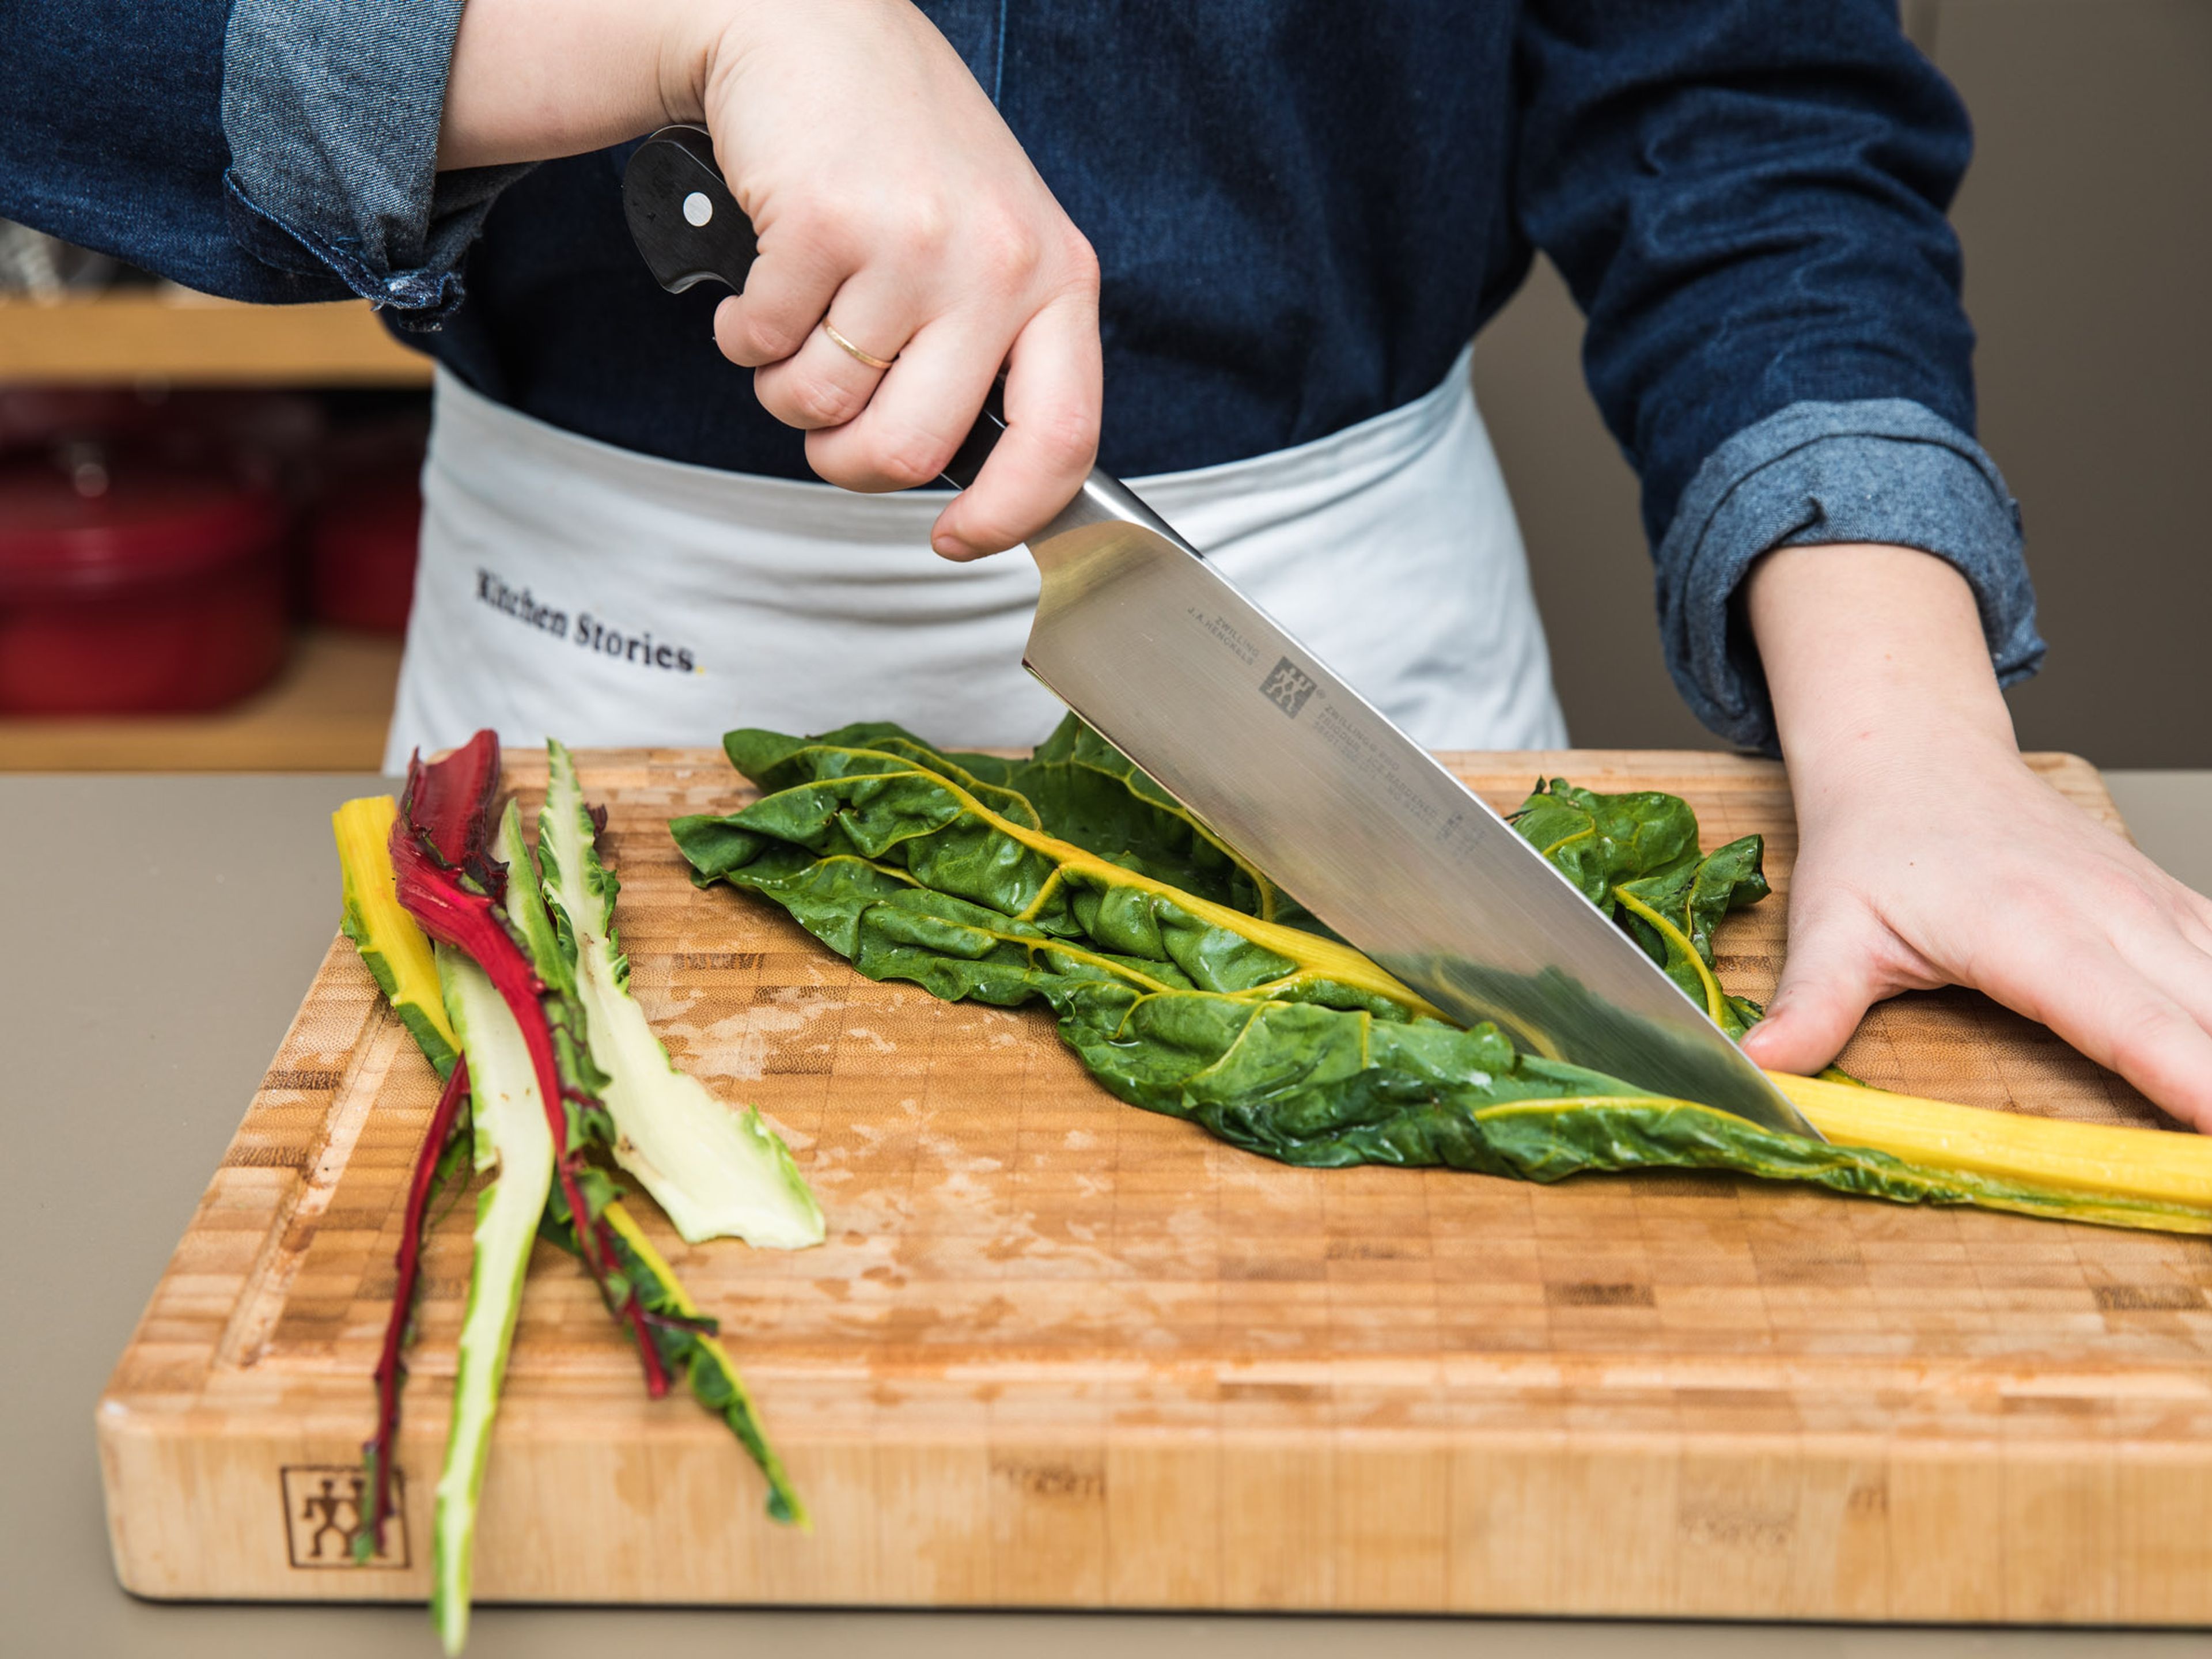 Wash Swiss chard, slice the leaves from the stems, and tear them into pieces. Finely slice stems. Peel and finely dice shallots and garlic. Zest and juice lemon. Set everything aside.